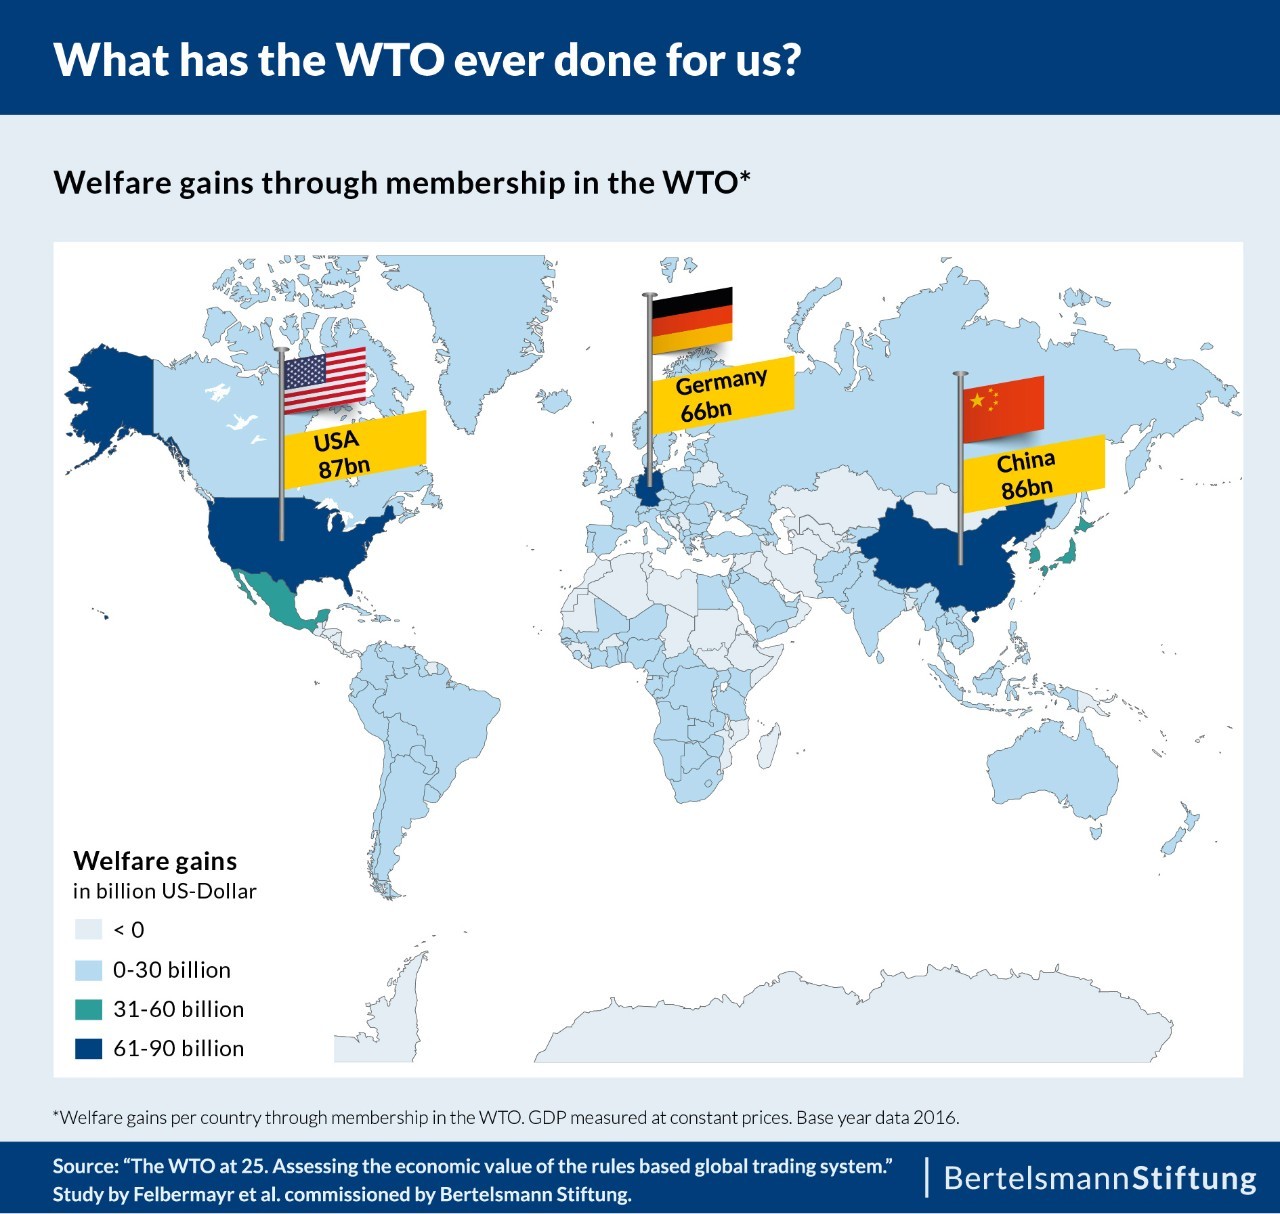 gts-what-has-wto-done-for-us-image2